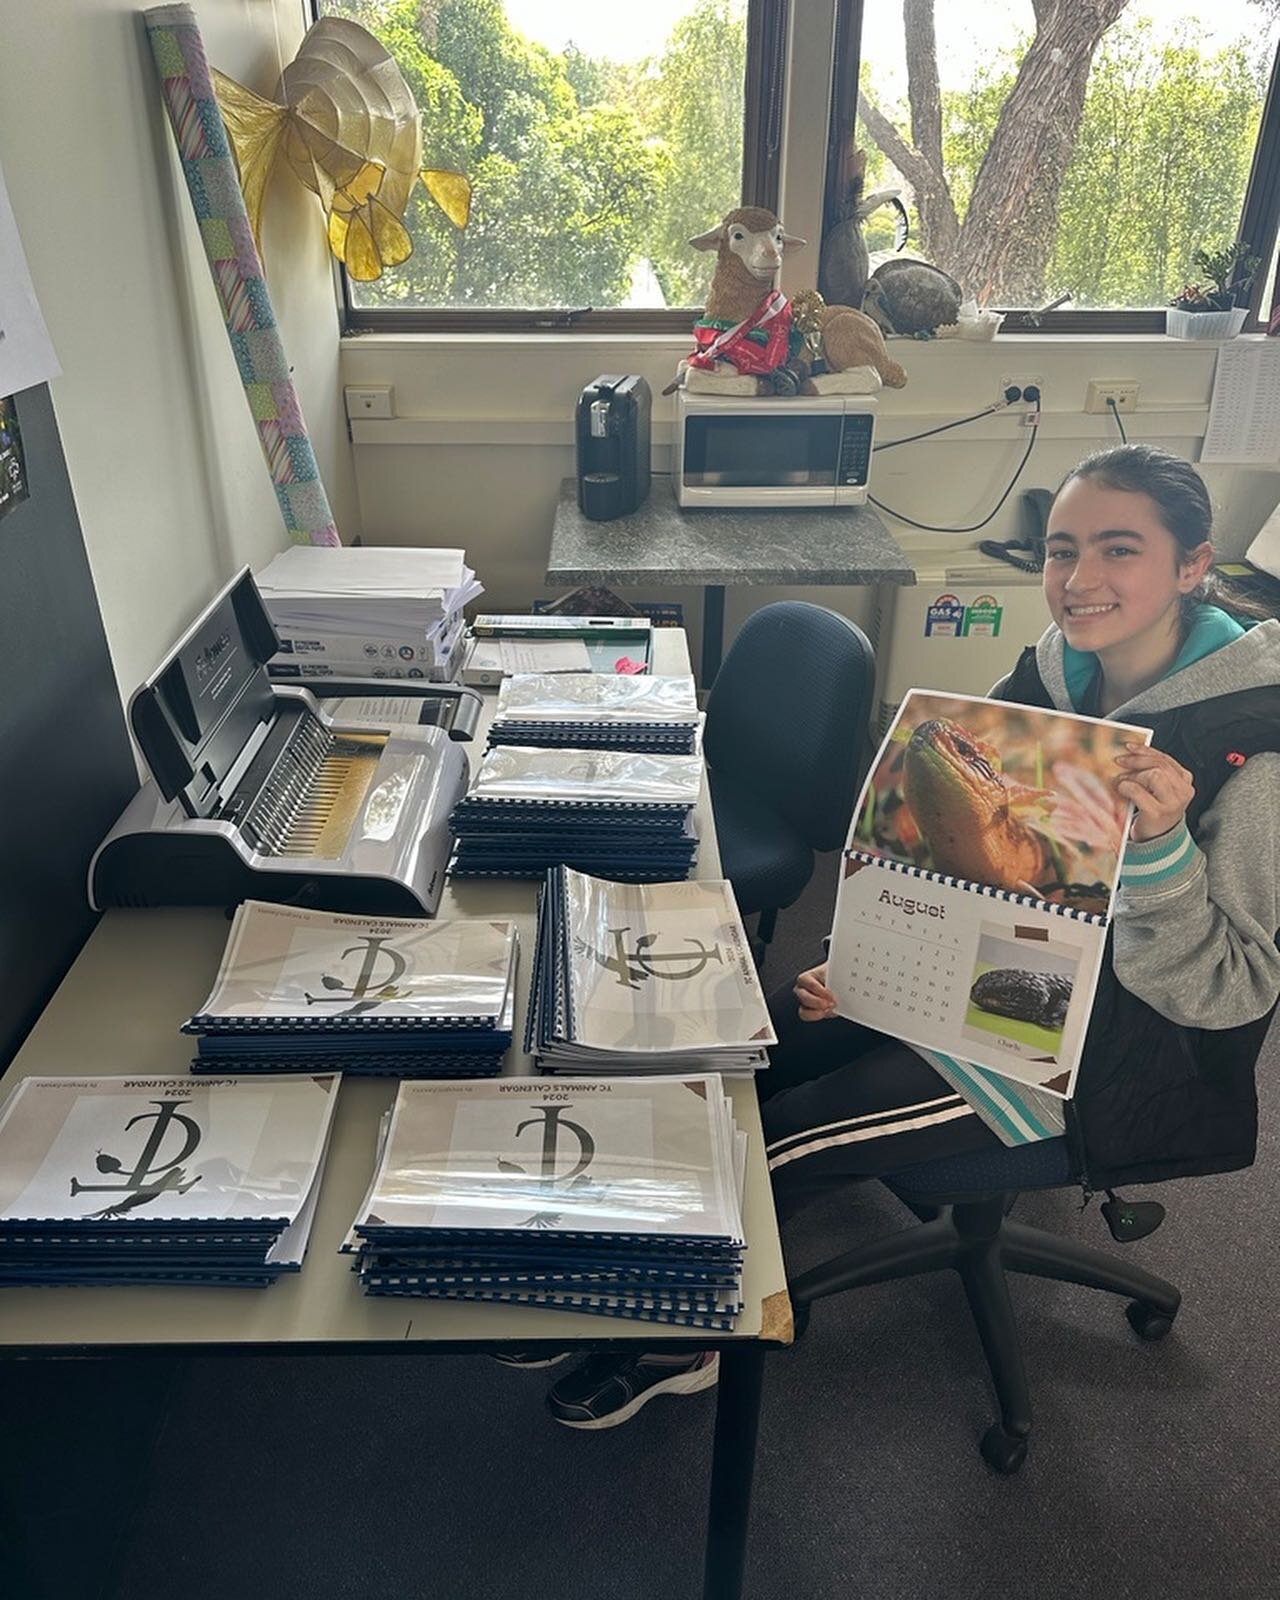 Hello, my name is Imogen and I am a Skinks Head Keeper at TC. As a part of my school project, I have selected to raise money through the designing, production and selling of calendars that feature the animals of TC. Selling for $20, all proceeds from